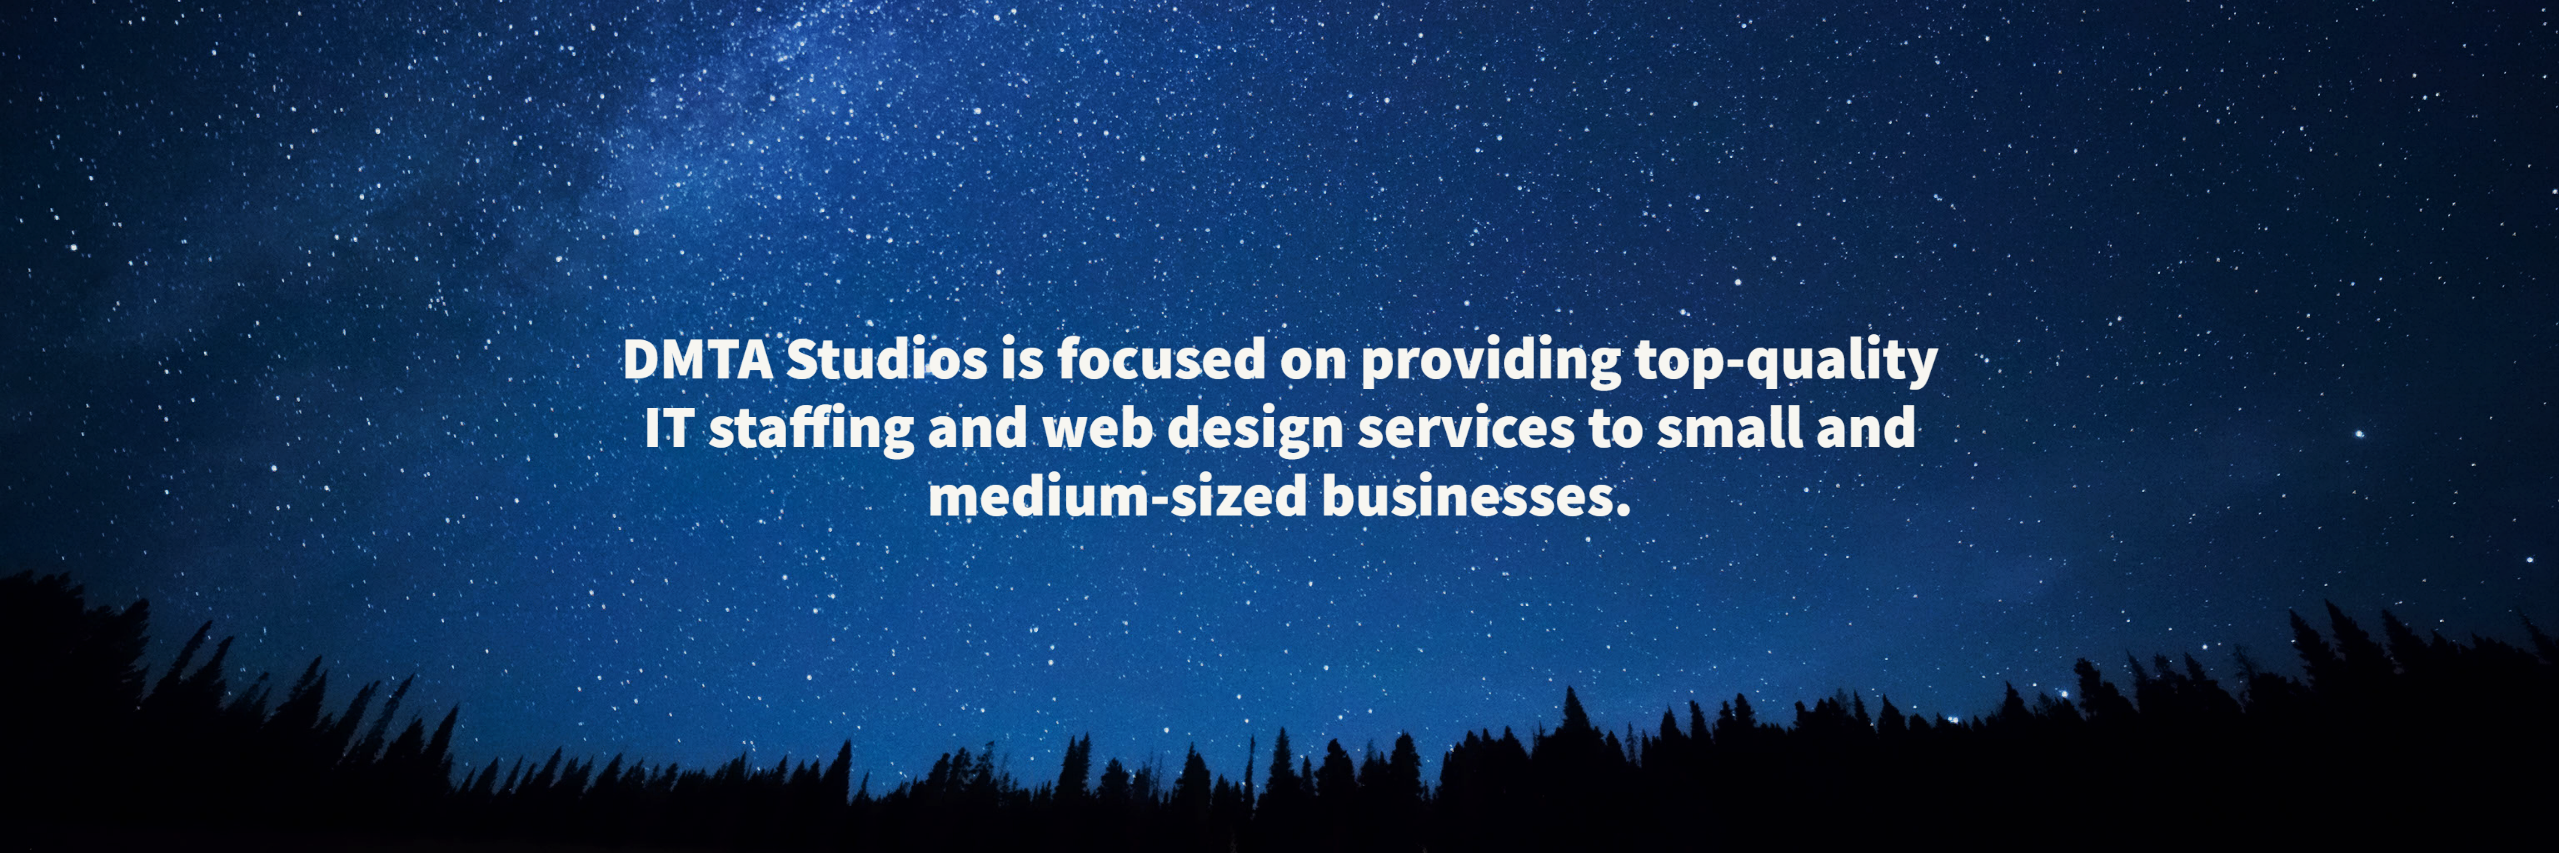 DMTA Studios is focused on providing top-quality IT staffing and web design services to small and medium-sized businesses. 